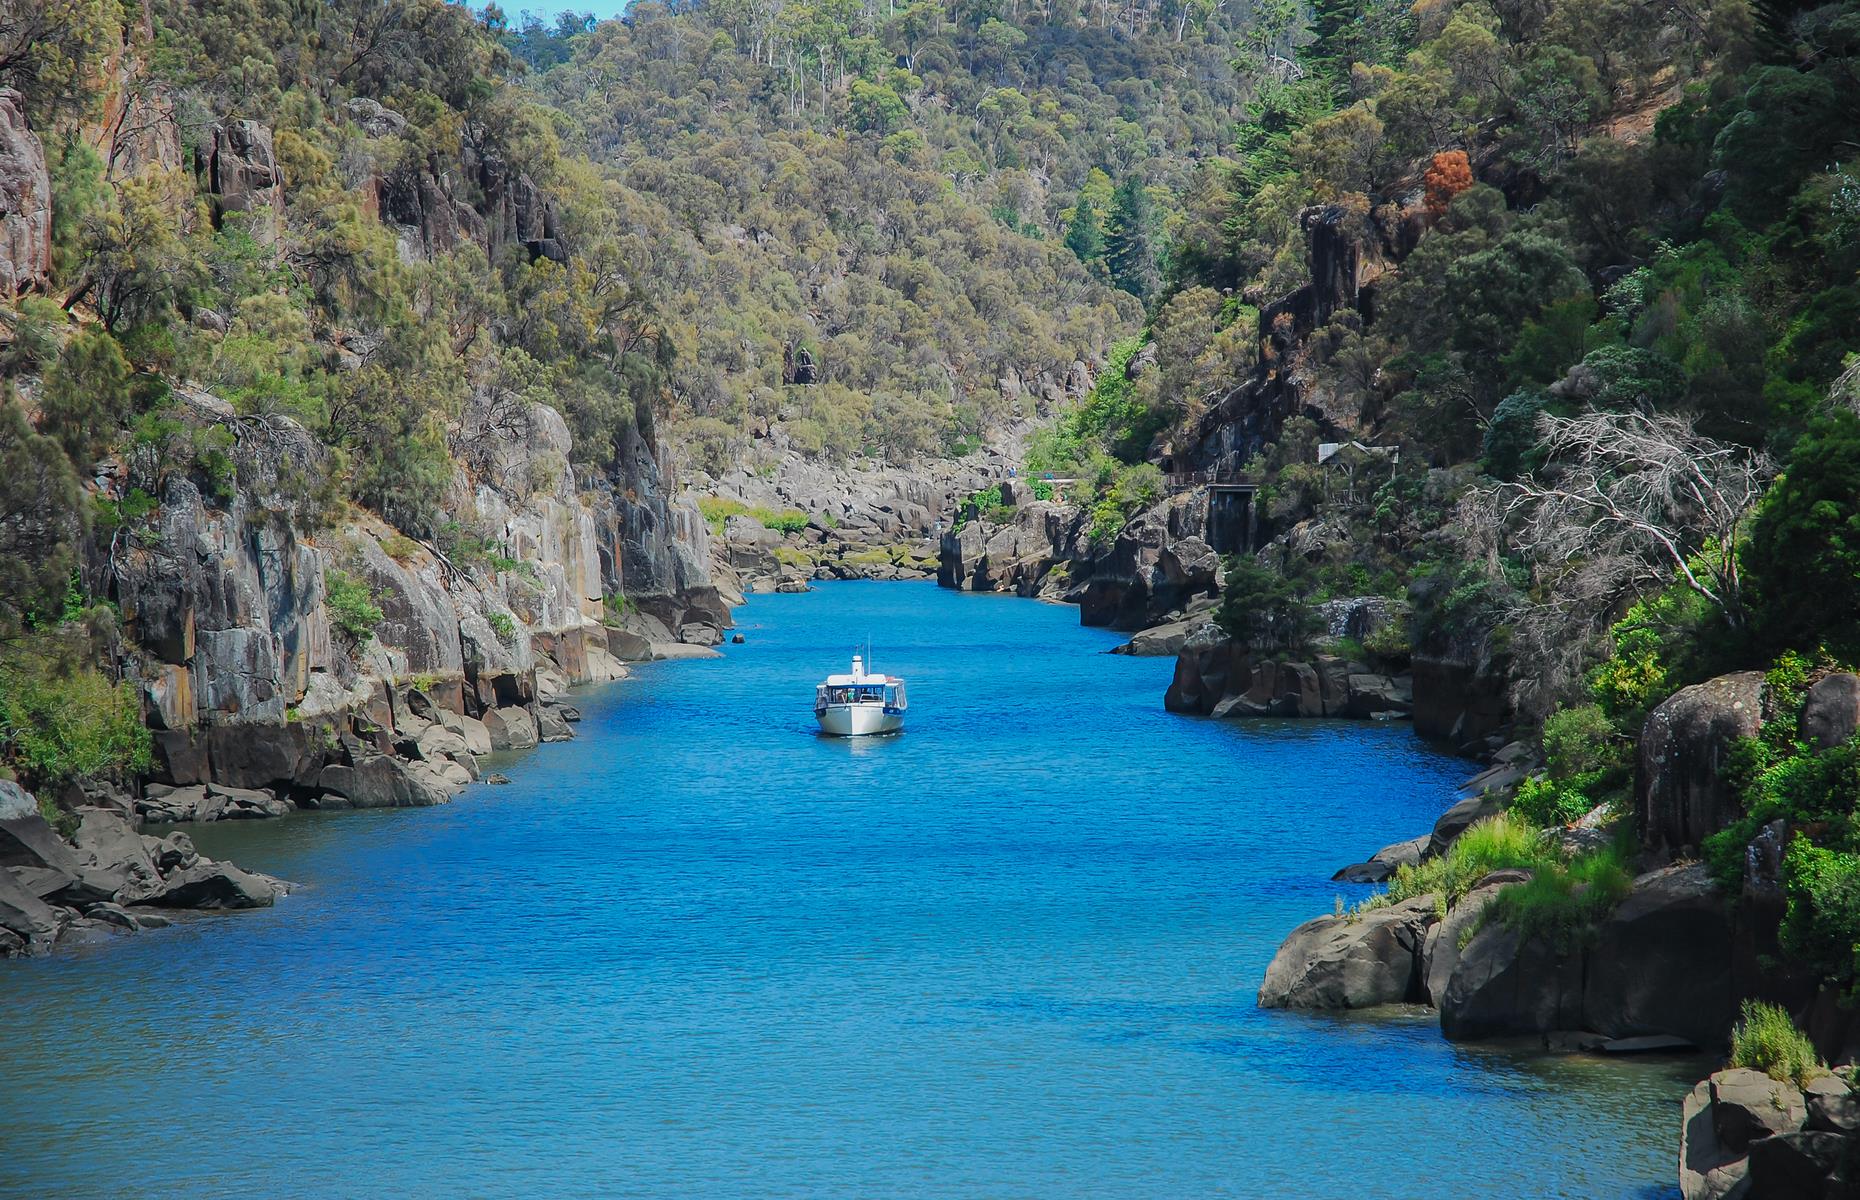 <p>The gaping <a href="https://www.launcestoncataractgorge.com.au/">Cataract Gorge</a>, just a short stroll away from Launceston’s centre, is a wonderful place to discover some of Tasmania’s native flora and fauna. Here you can explore the bushland or head to the Cliff Grounds to wander around Victorian-era gardens with ferns and exotic plants. Follow the cliff-face pathways, originally built in the 1890s, and gawp down onto the South Esk River. A walk over the Alexandra Suspension Bridge is a must too, and a splash in the free outdoor swimming pool is a great way to cool off after a hike.</p>